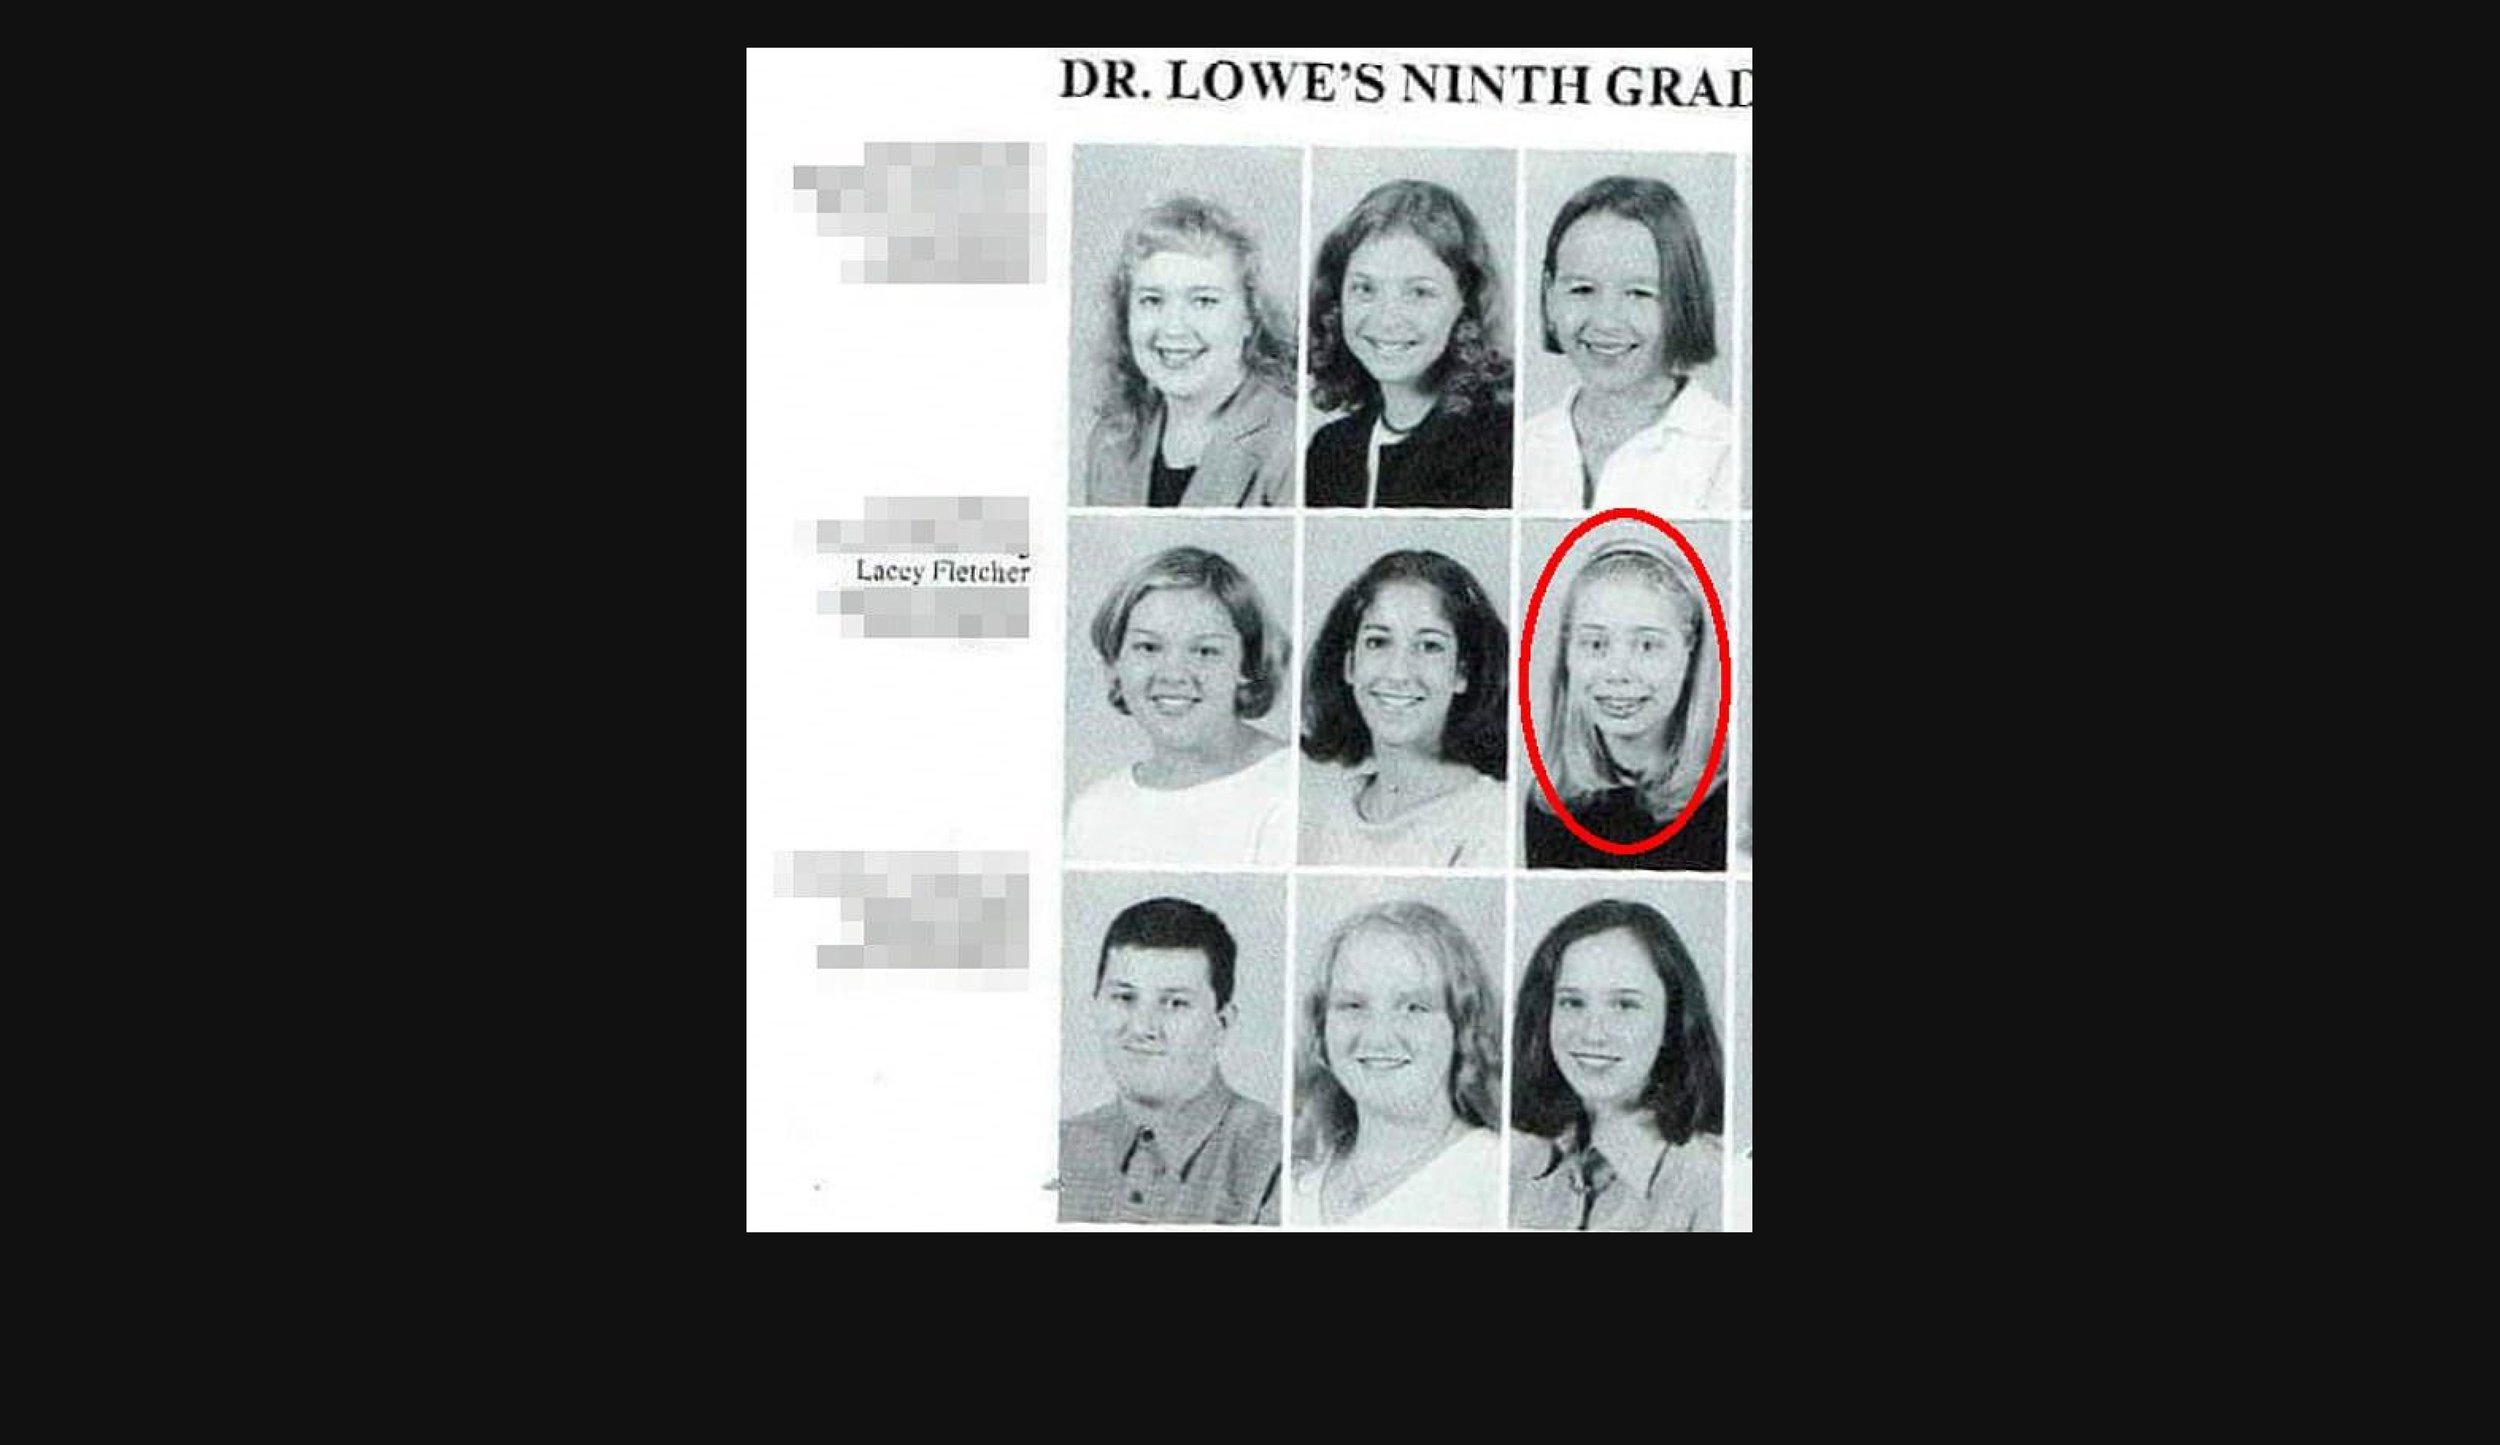  Lacey in Ninth Grade approx. 2002 